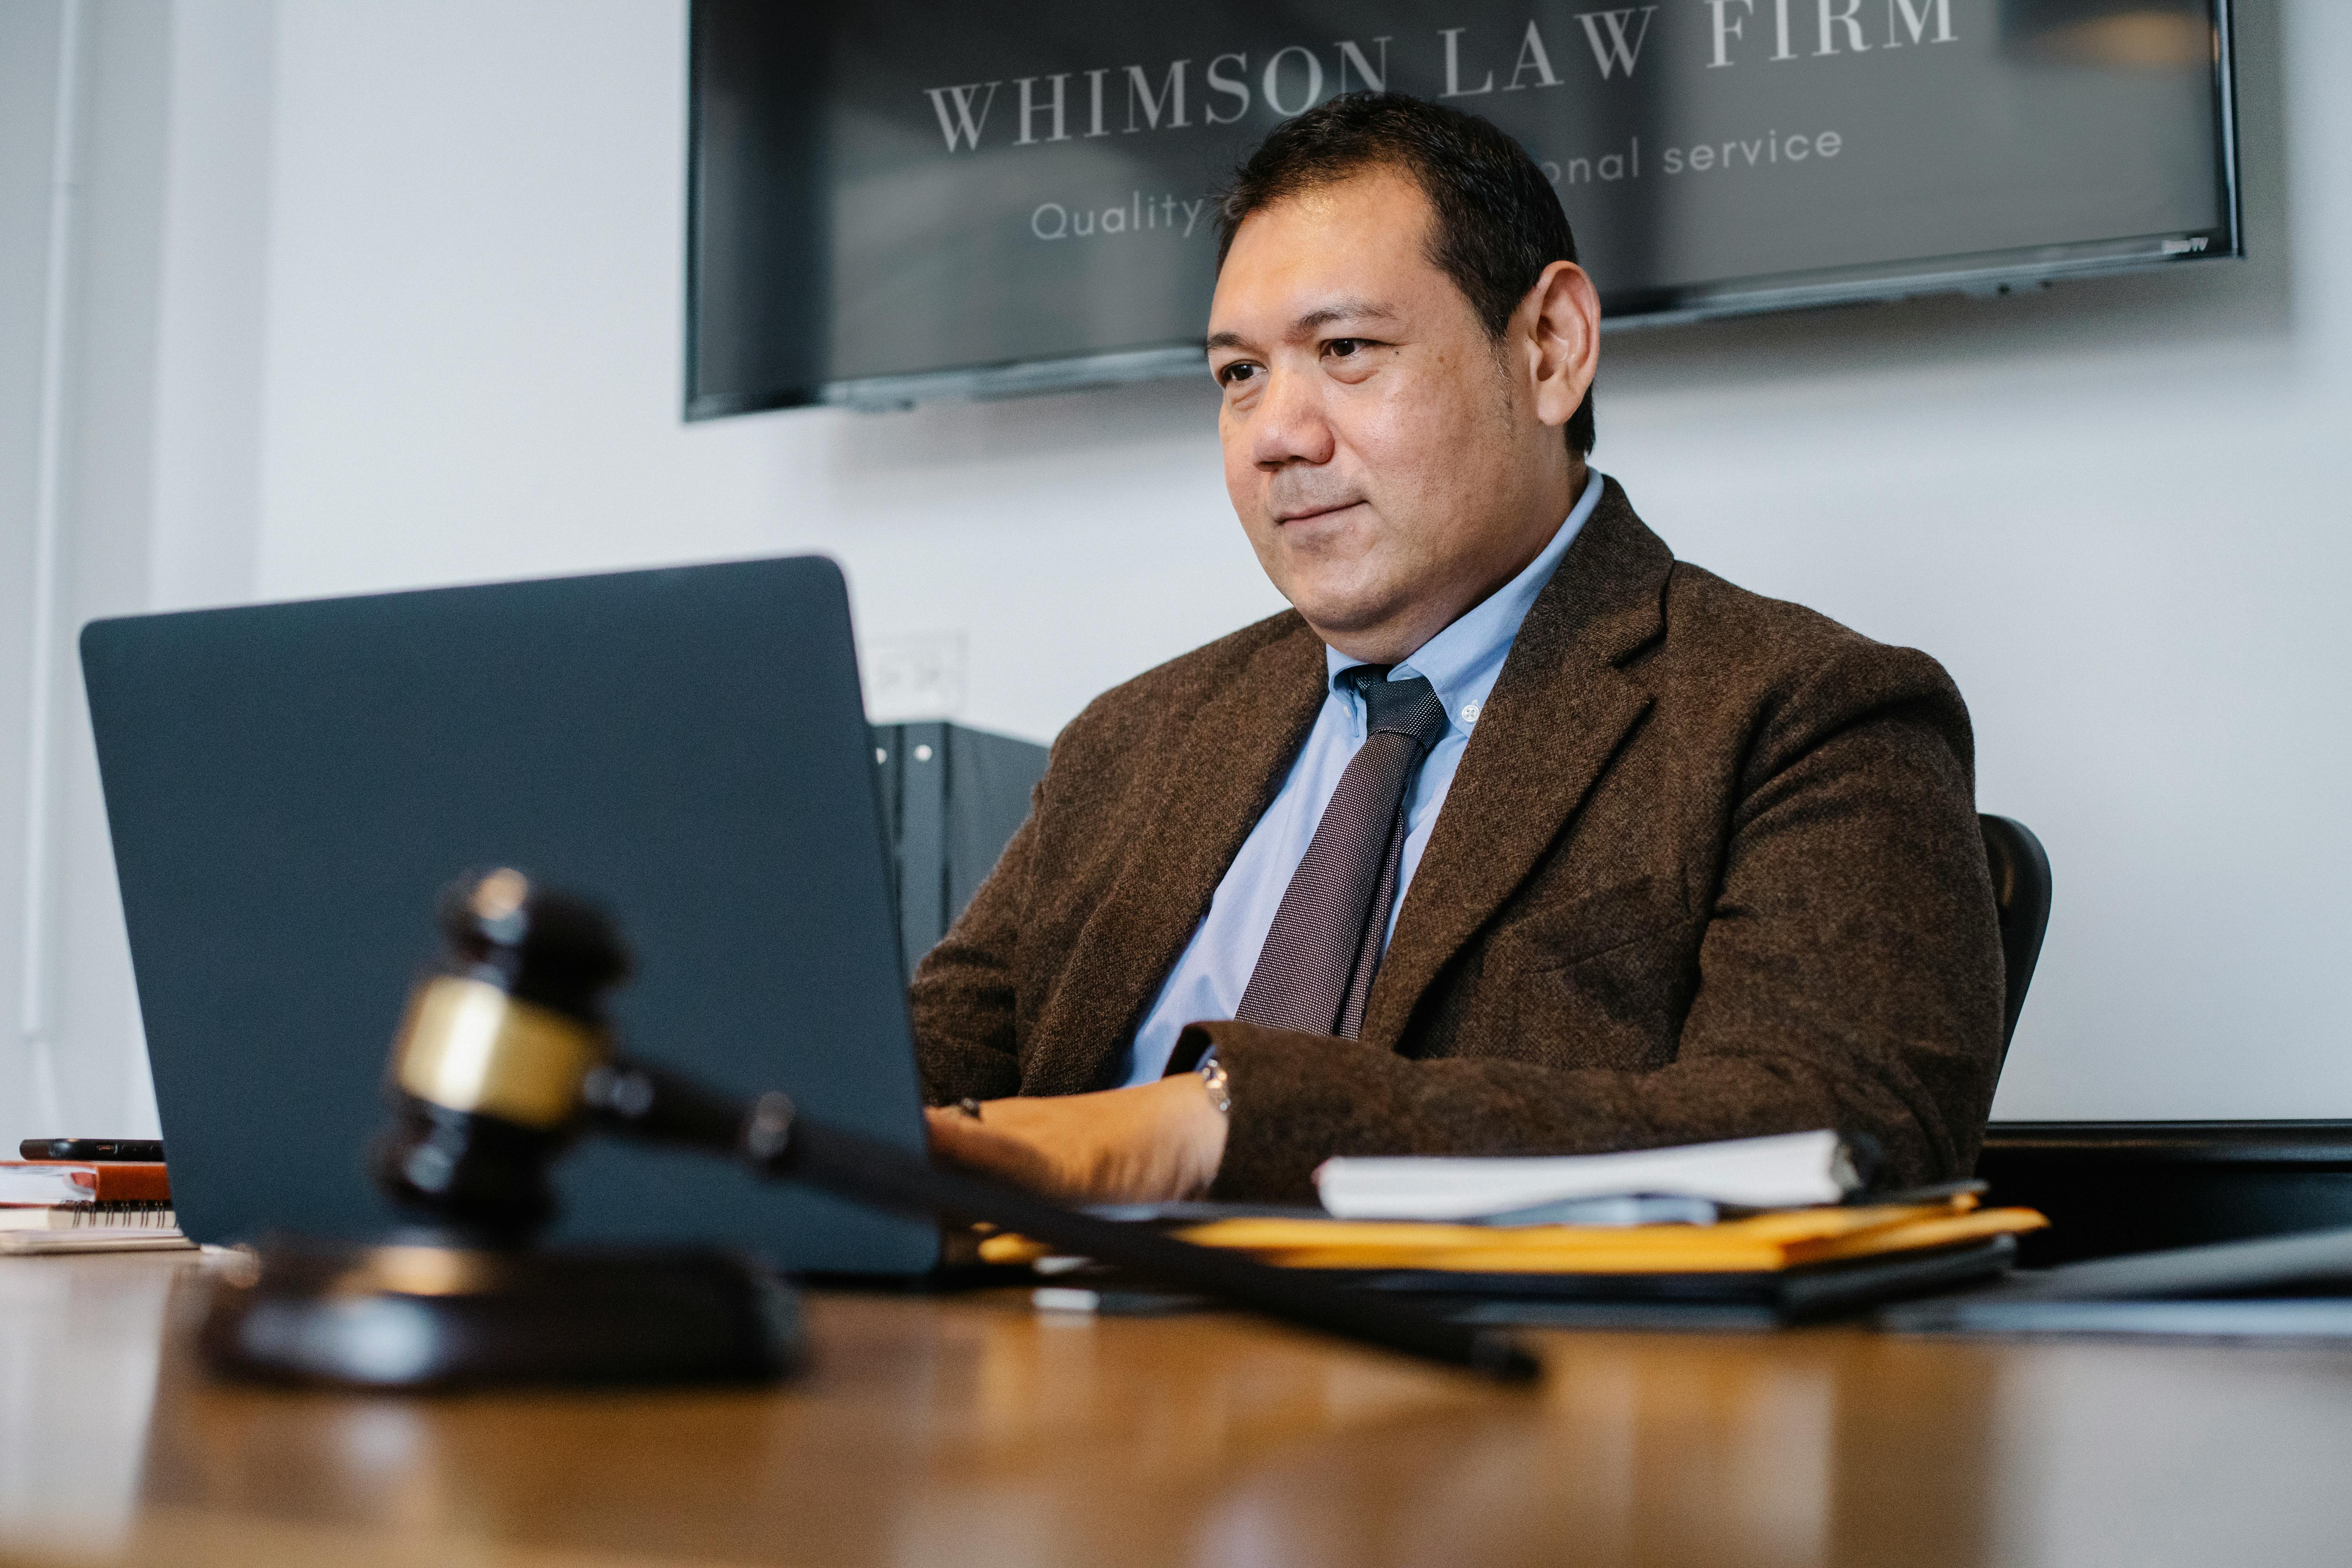 A lawyer busy working | Source: Pexels